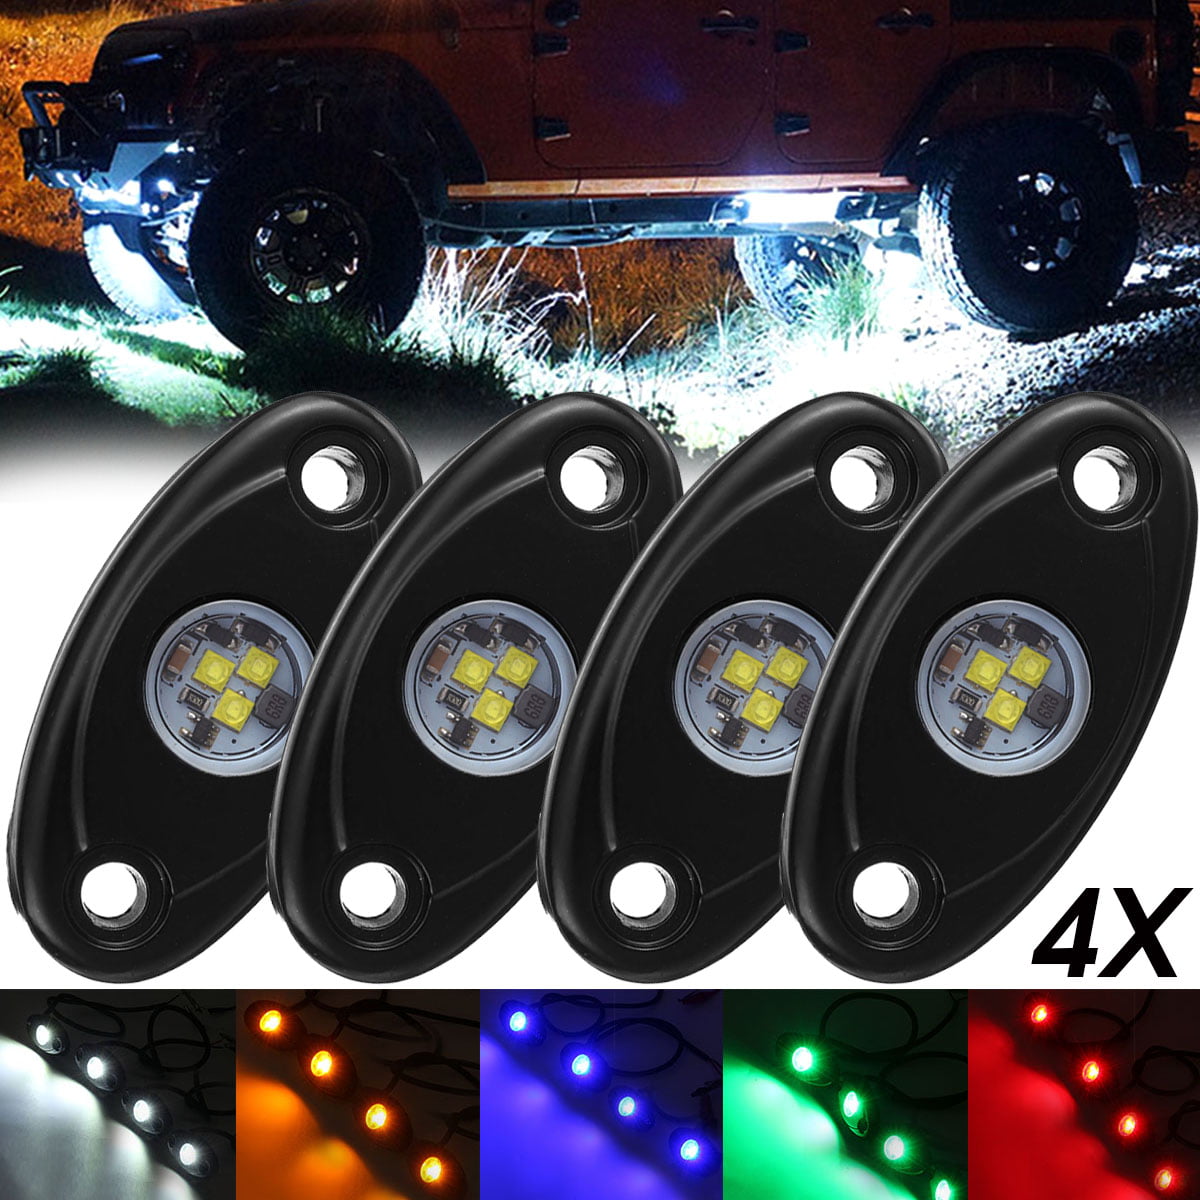 20 Green 9W LED Rock Light kit for JEEP Offroad Truck Under Body Trail Rig Light 